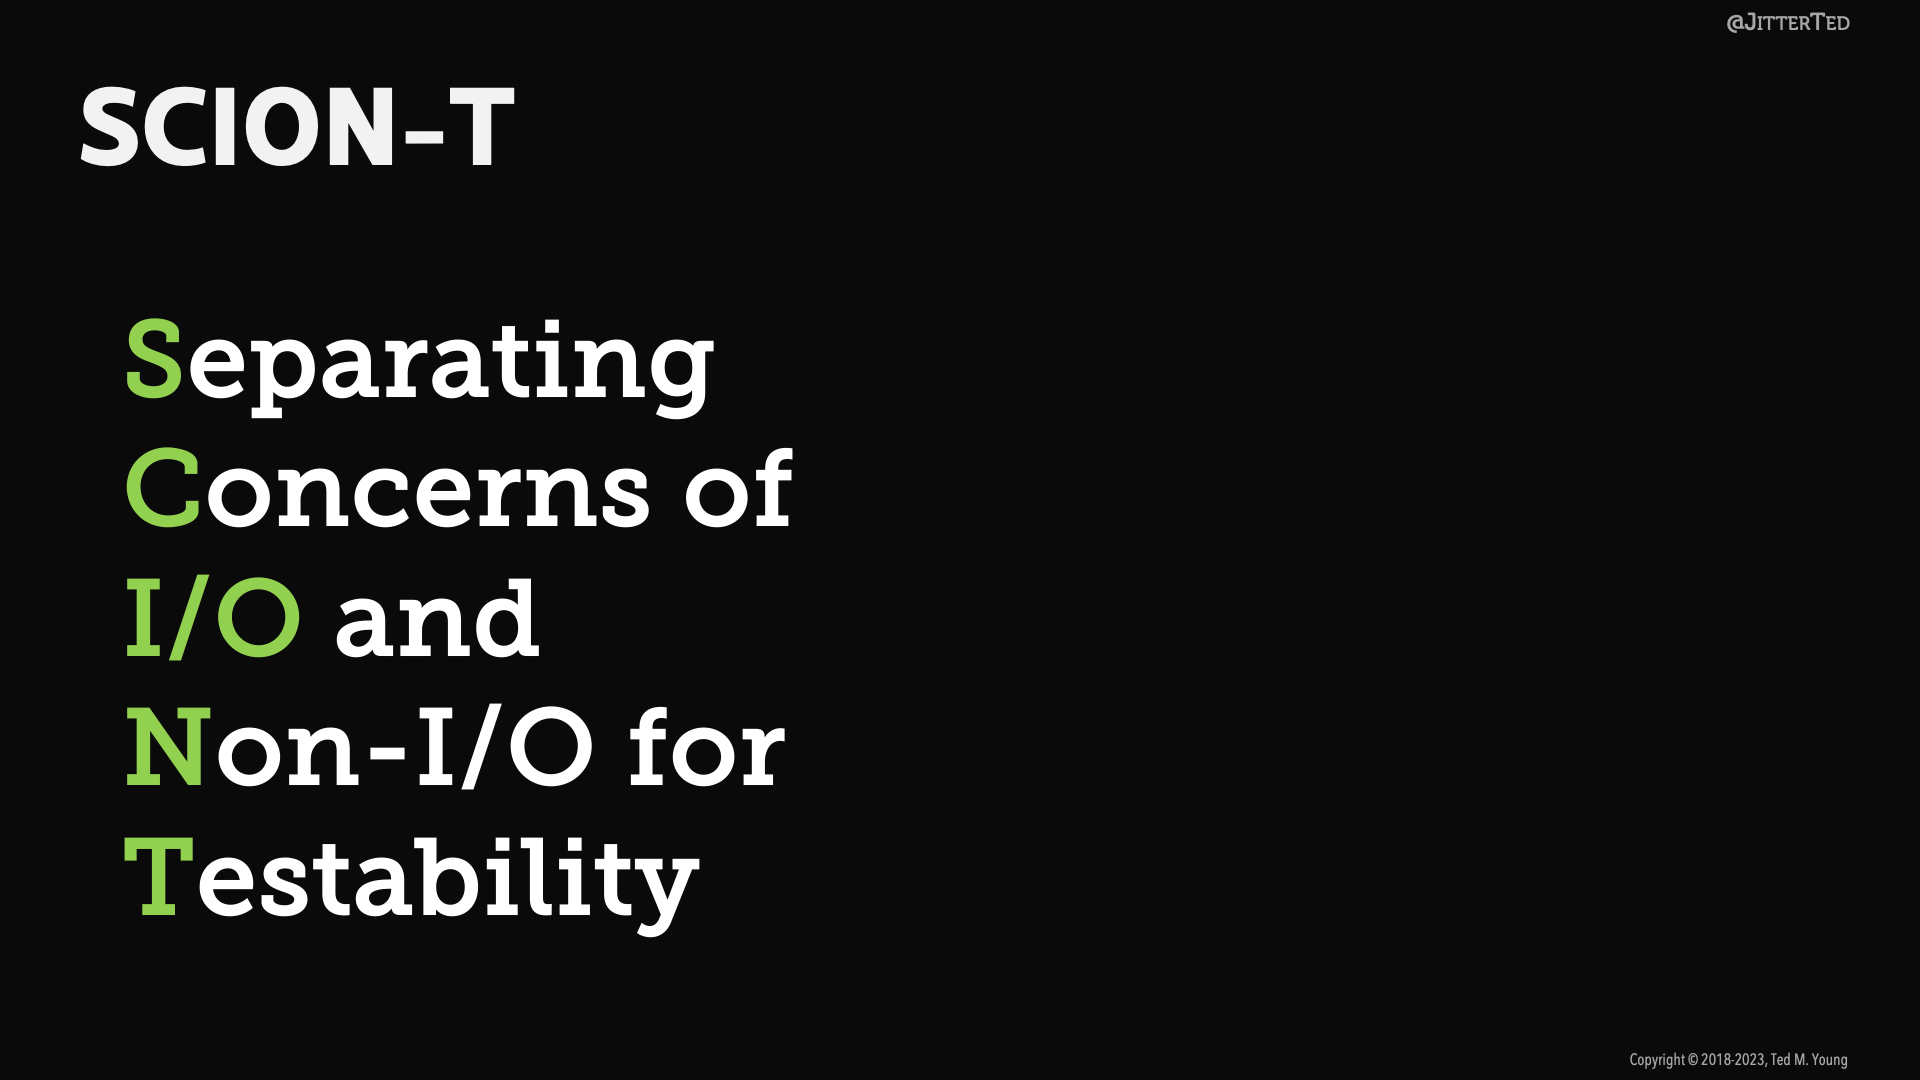 Slide from the presentation that has the acronym SCION-T, which stands for Separating Concerns of I/O and Non-I/O for Testability